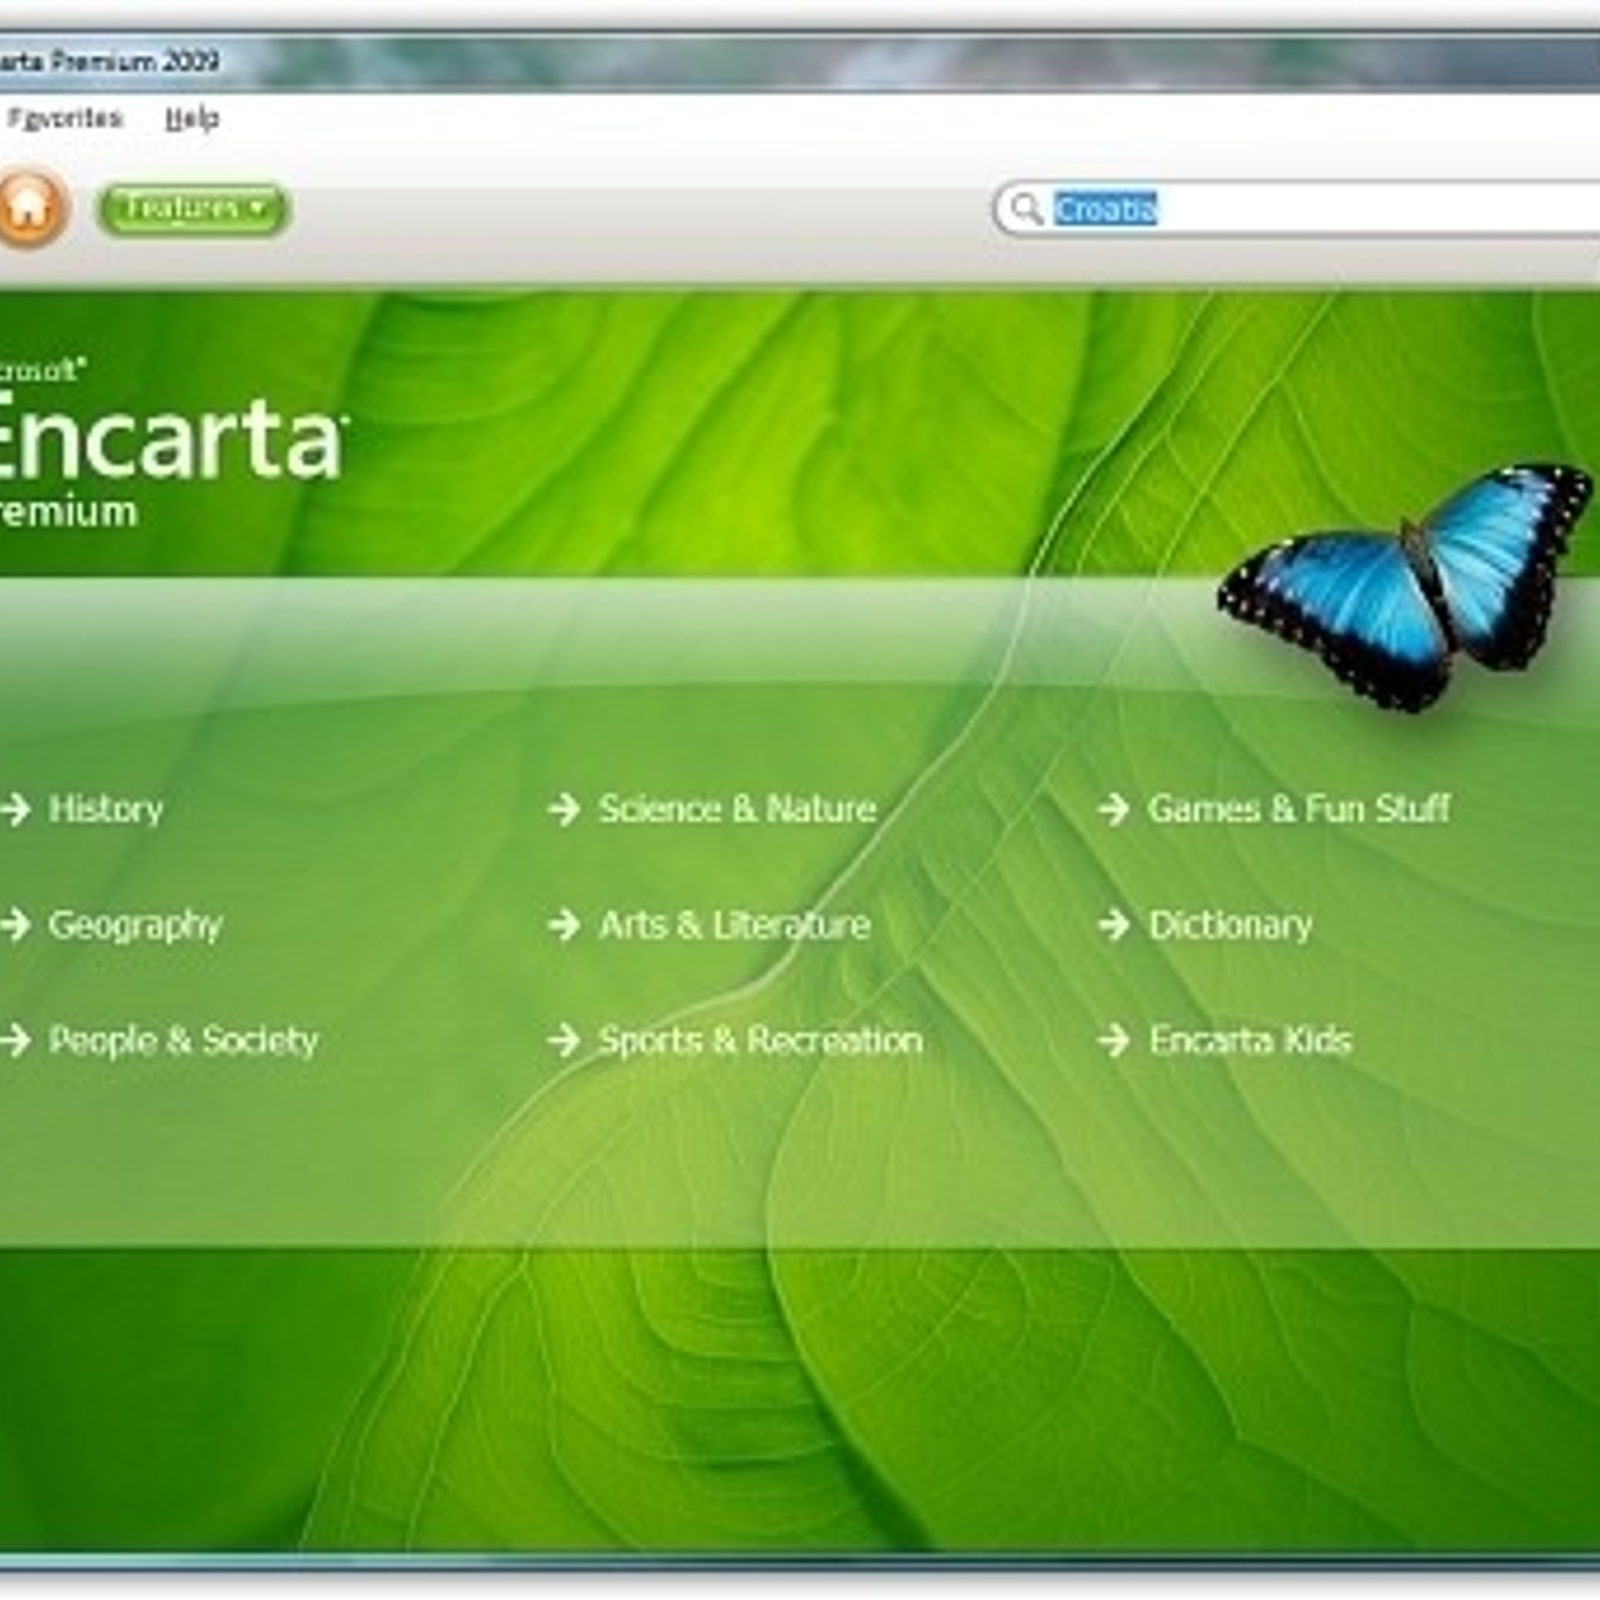 Where can you download Microsoft Encarta software for free?